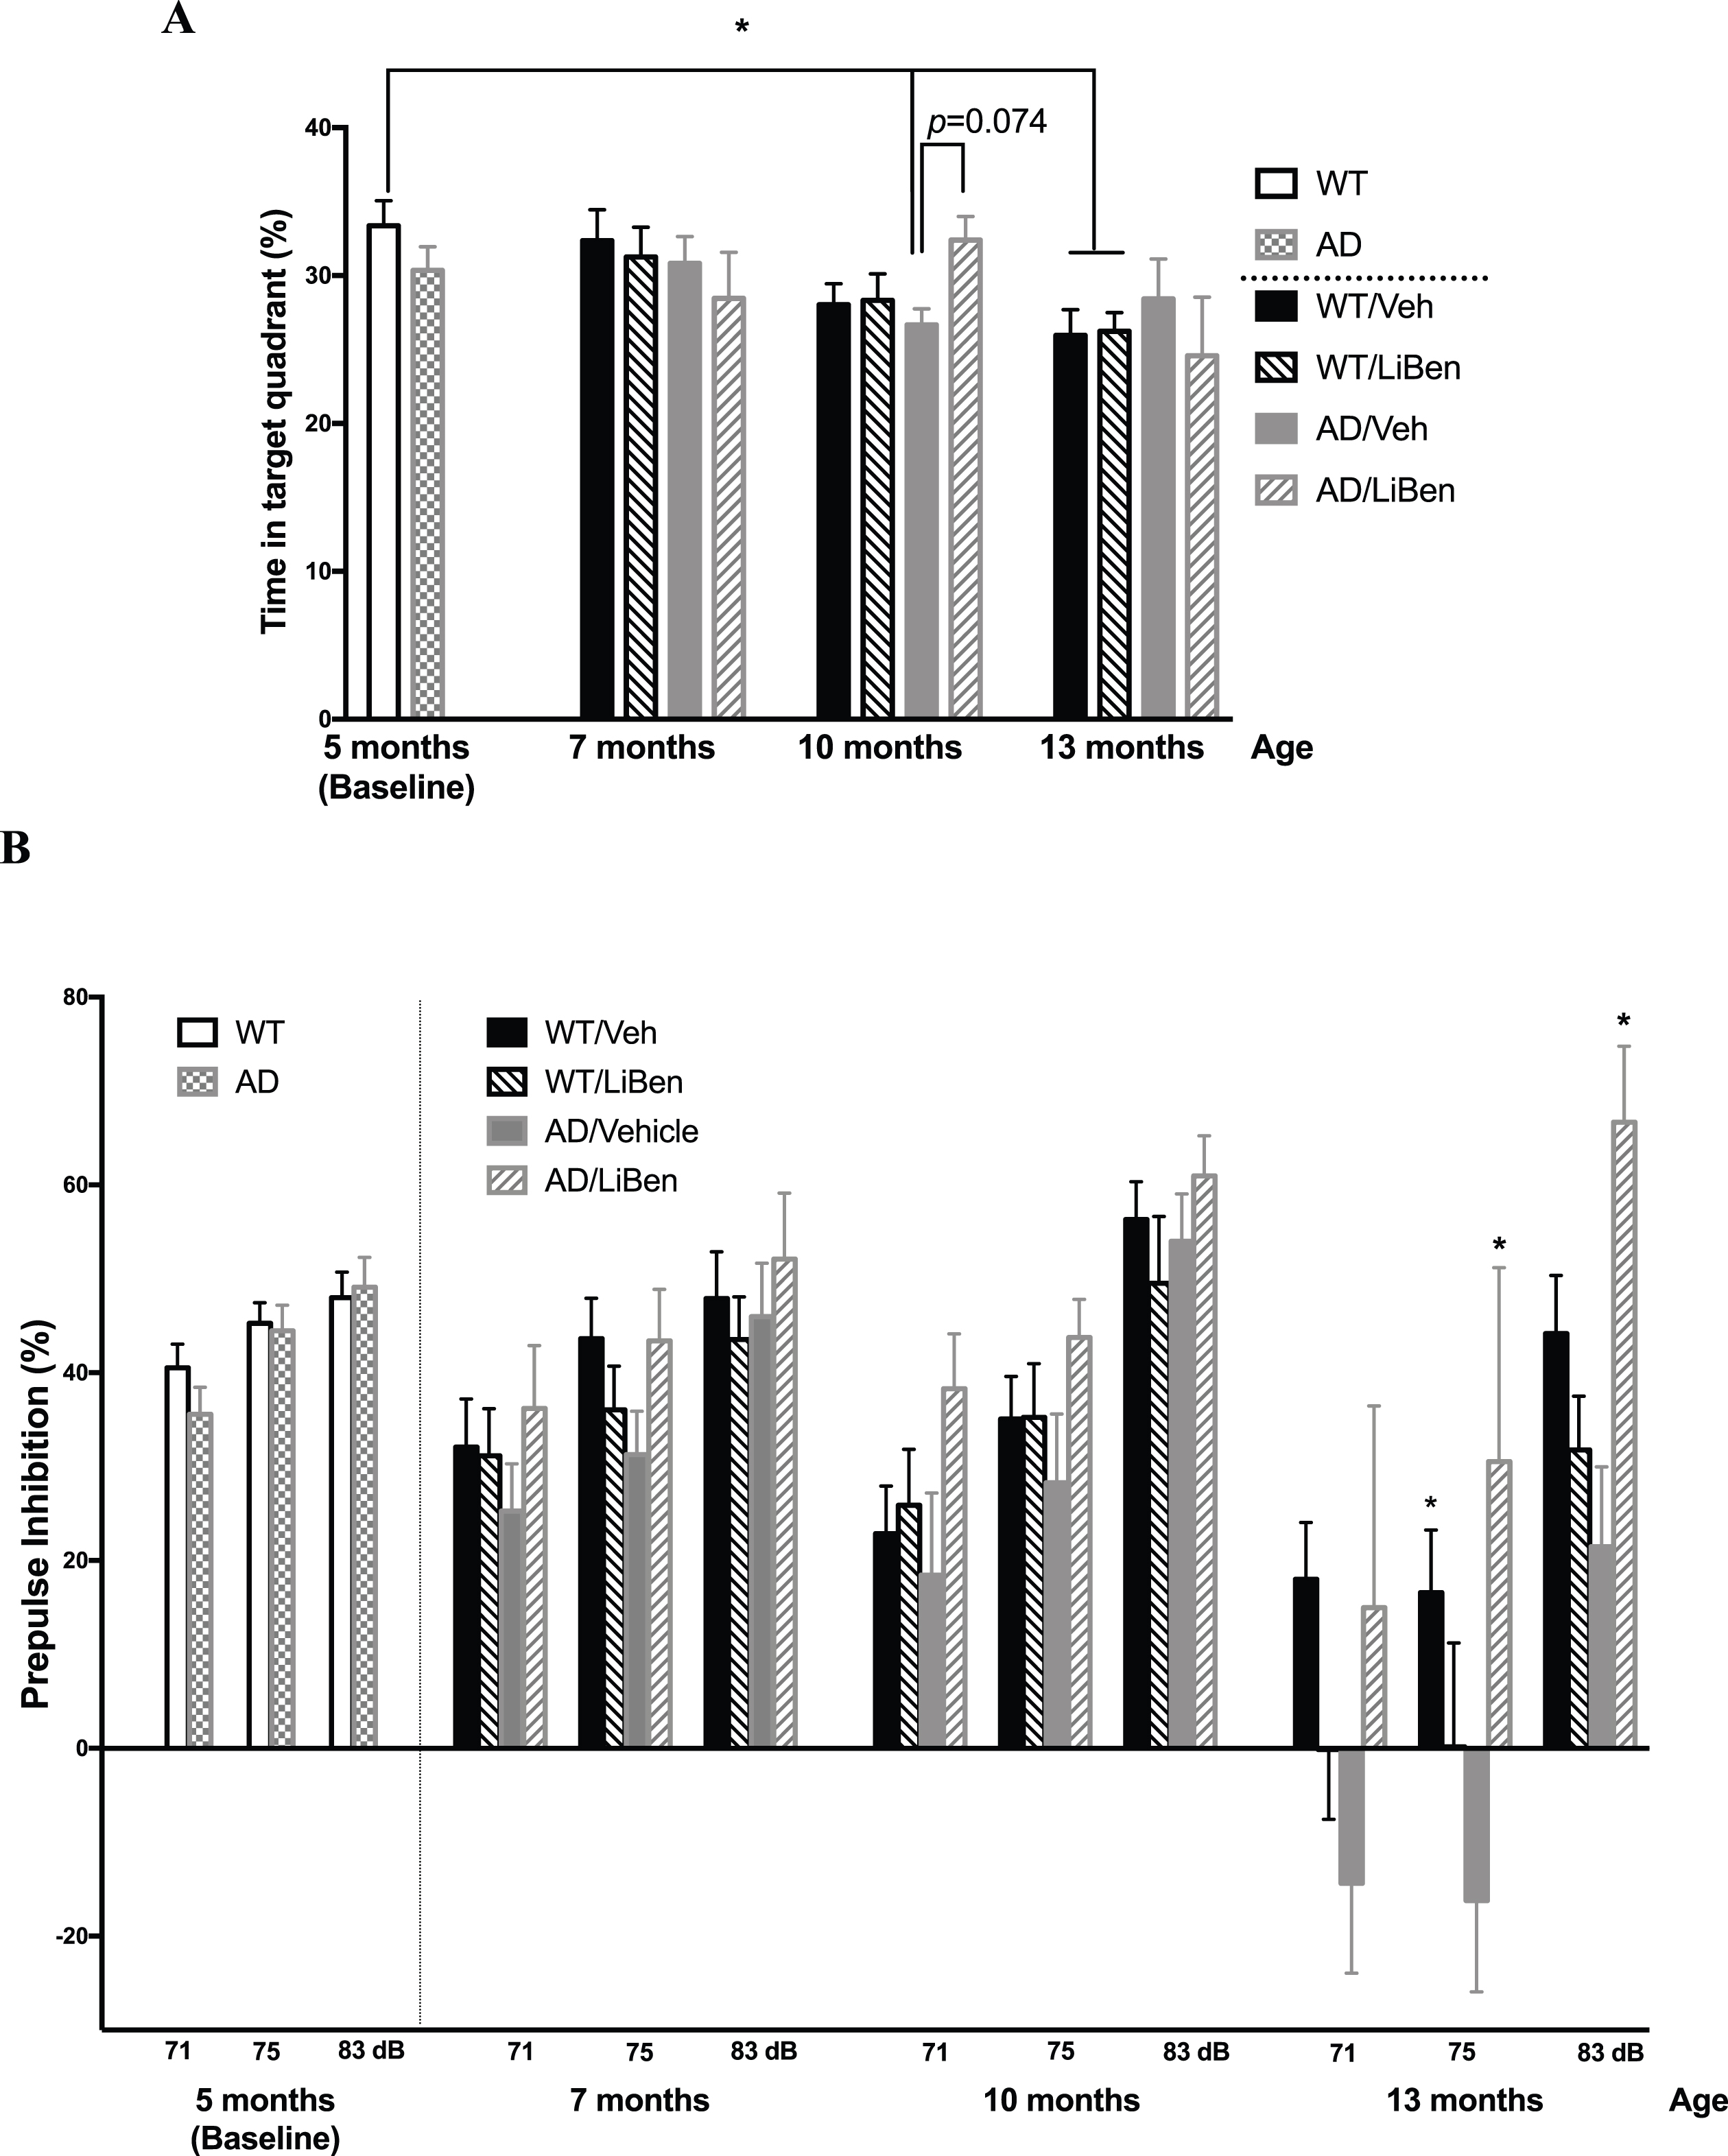 Effect of lithium benzoate on the cognition and memory impairment in AD transgenic mice model. AD transgenic mice (AD, APPswe/PS1-dE9 line) received intraperitoneal injection of vehicle (AD/Veh, N = 16) or lithium benzoate (AD/LiBen, N = 12), and wild-type (WT) littermates received intraperitoneal injection of vehicle (WT/Veh, N = 27) or lithium benzoate (WT/LiBen, N = 23) for 8 months beginning at 5 months of age. A) Cognition and memory abilities of AD mice and their wildtype littermates were assessed using the Barnes maze test. The bar graph represents the ratio of time spending in the target quadrant divided by total exploring time during the probe trial of the test at the indicated age. LiBen-treated APP/PS1 mice (AD/LiBen) at 10 months of age tended to spend more time in target quadrant (p = 0.074), compared with vehicle-treated APP/PS1 mice (AD/Veh). B) Bar graphs represents the prepulse inhibition (PPI%) of AD mice and WT littermates at the indicated age. Some of the AD mice showed negative PPI suggesting of hearing impairment. Data presented as mean ± S.E.M. Two-way analysis of variance (ANOVA) followed by Dunnett’s multiple comparison test was used. * Represents p < 0.05 as compared to WT mice at 5 months of age for Barnes maze test and to the concurrent AD/Veh mice for PPI test. AD, Alzheimer’s disease transgenic mice; WT, Wildtype littermates; Veh, Vehicle; LiBen, Lithium benzoate.